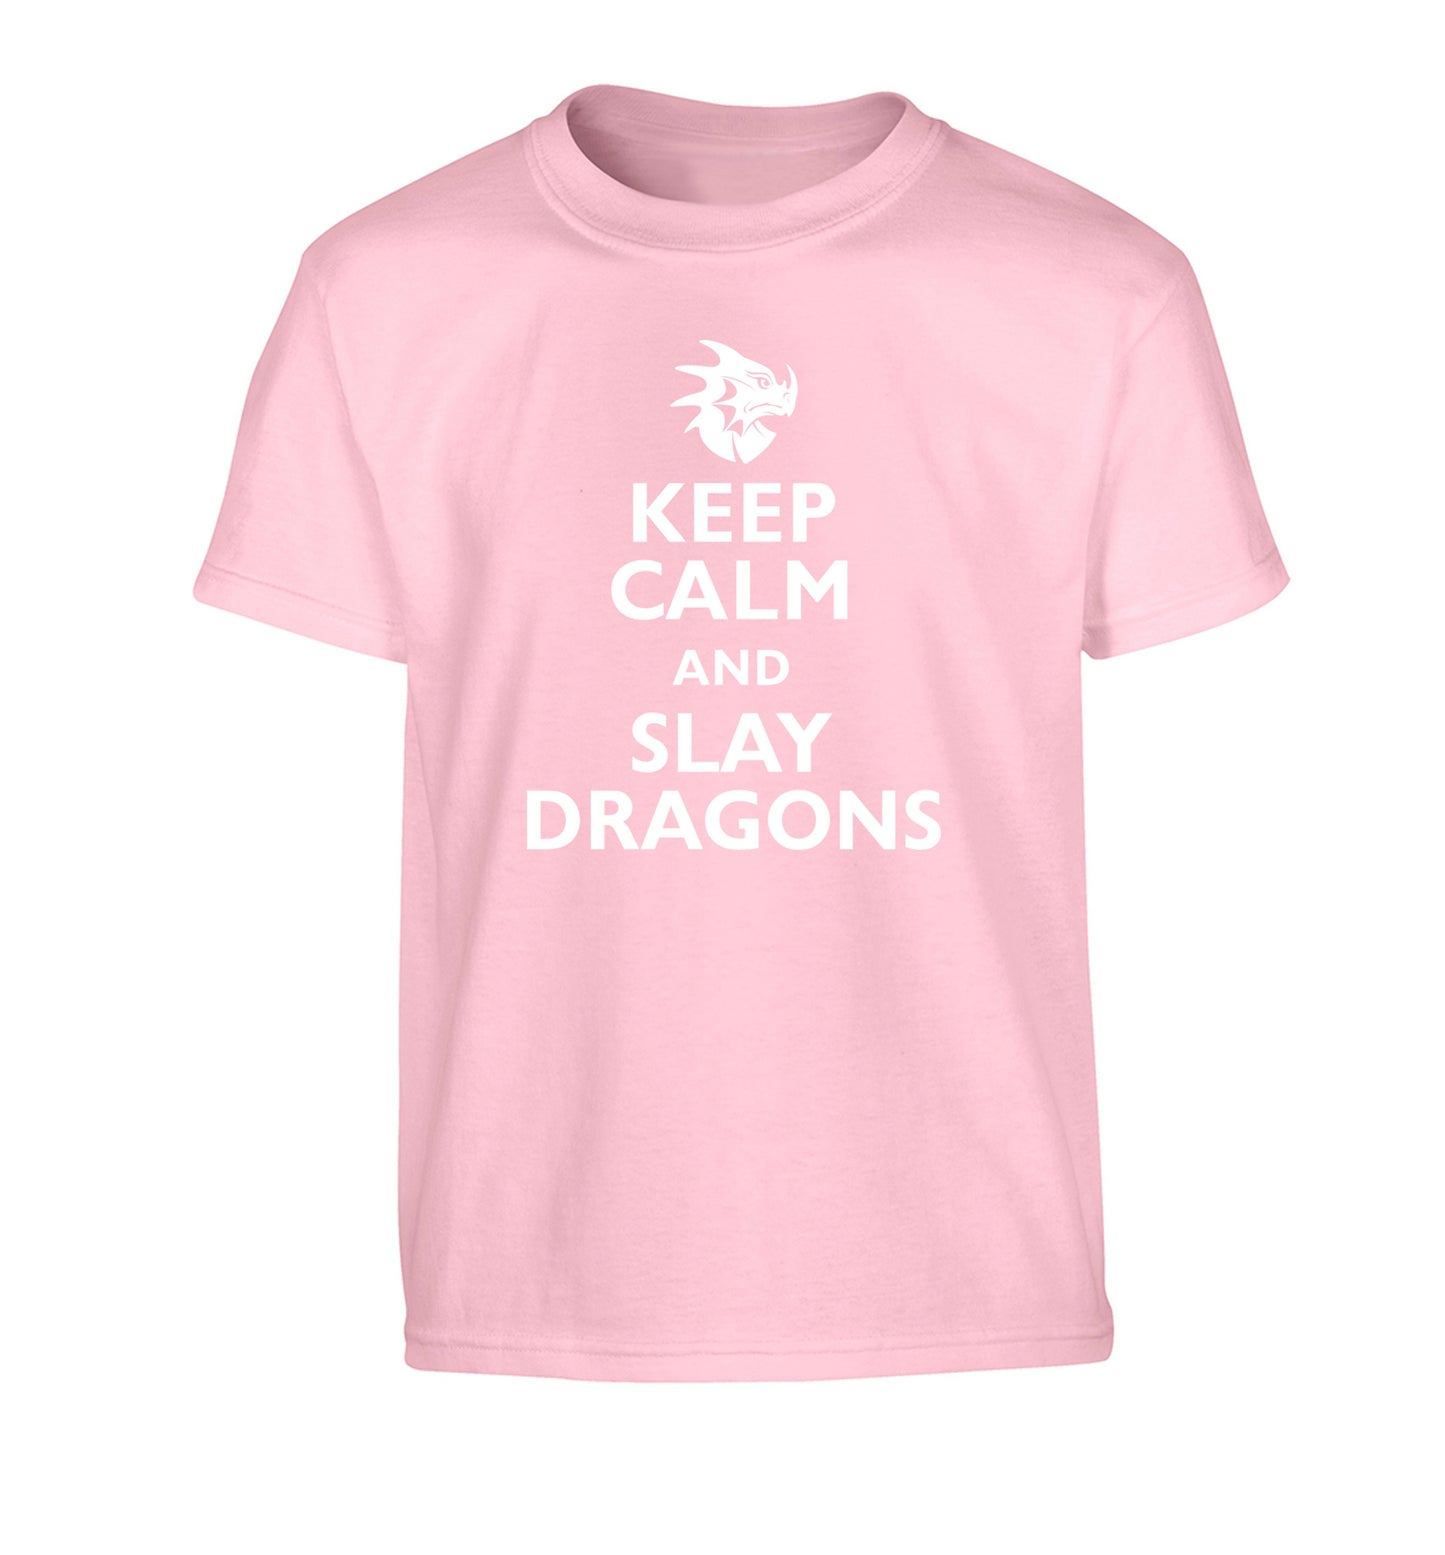 Keep calm and slay dragons Children's light pink Tshirt 12-14 Years